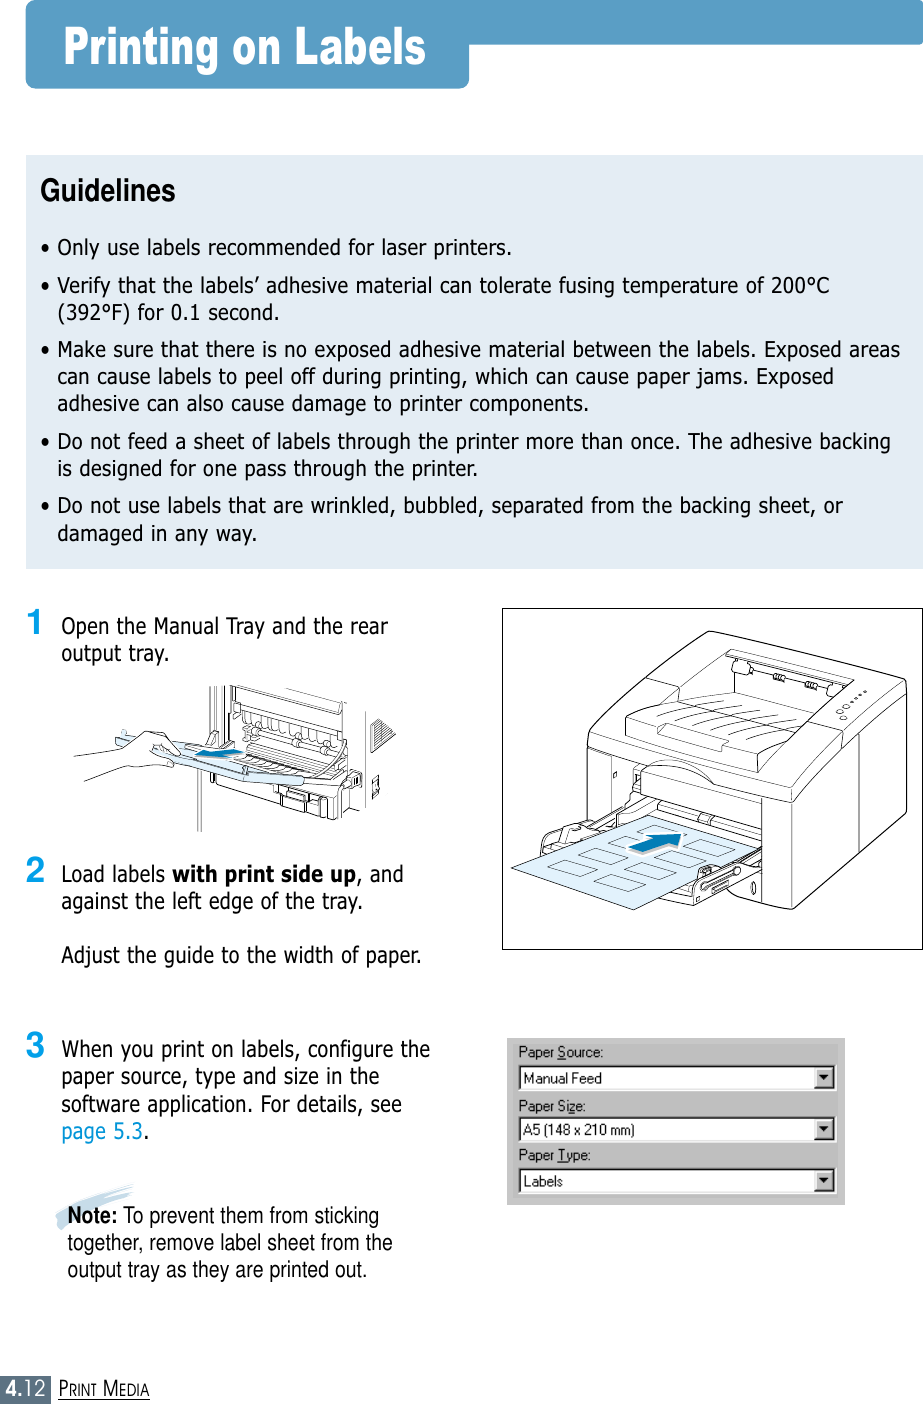 4.12PRINT MEDIAPrinting on LabelsGuidelines• Only use labels recommended for laser printers.• Verify that the labels’ adhesive material can tolerate fusing temperature of 200°C(392°F) for 0.1 second.• Make sure that there is no exposed adhesive material between the labels. Exposed areascan cause labels to peel off during printing, which can cause paper jams. Exposedadhesive can also cause damage to printer components.• Do not feed a sheet of labels through the printer more than once. The adhesive backingis designed for one pass through the printer.• Do not use labels that are wrinkled, bubbled, separated from the backing sheet, ordamaged in any way.1Open the Manual Tray and the rearoutput tray.2Load labels with print side up, andagainst the left edge of the tray. Adjust the guide to the width of paper.3When you print on labels, configure thepaper source, type and size in thesoftware application. For details, seepage 5.3.Note: To prevent them from stickingtogether, remove label sheet from theoutput tray as they are printed out.